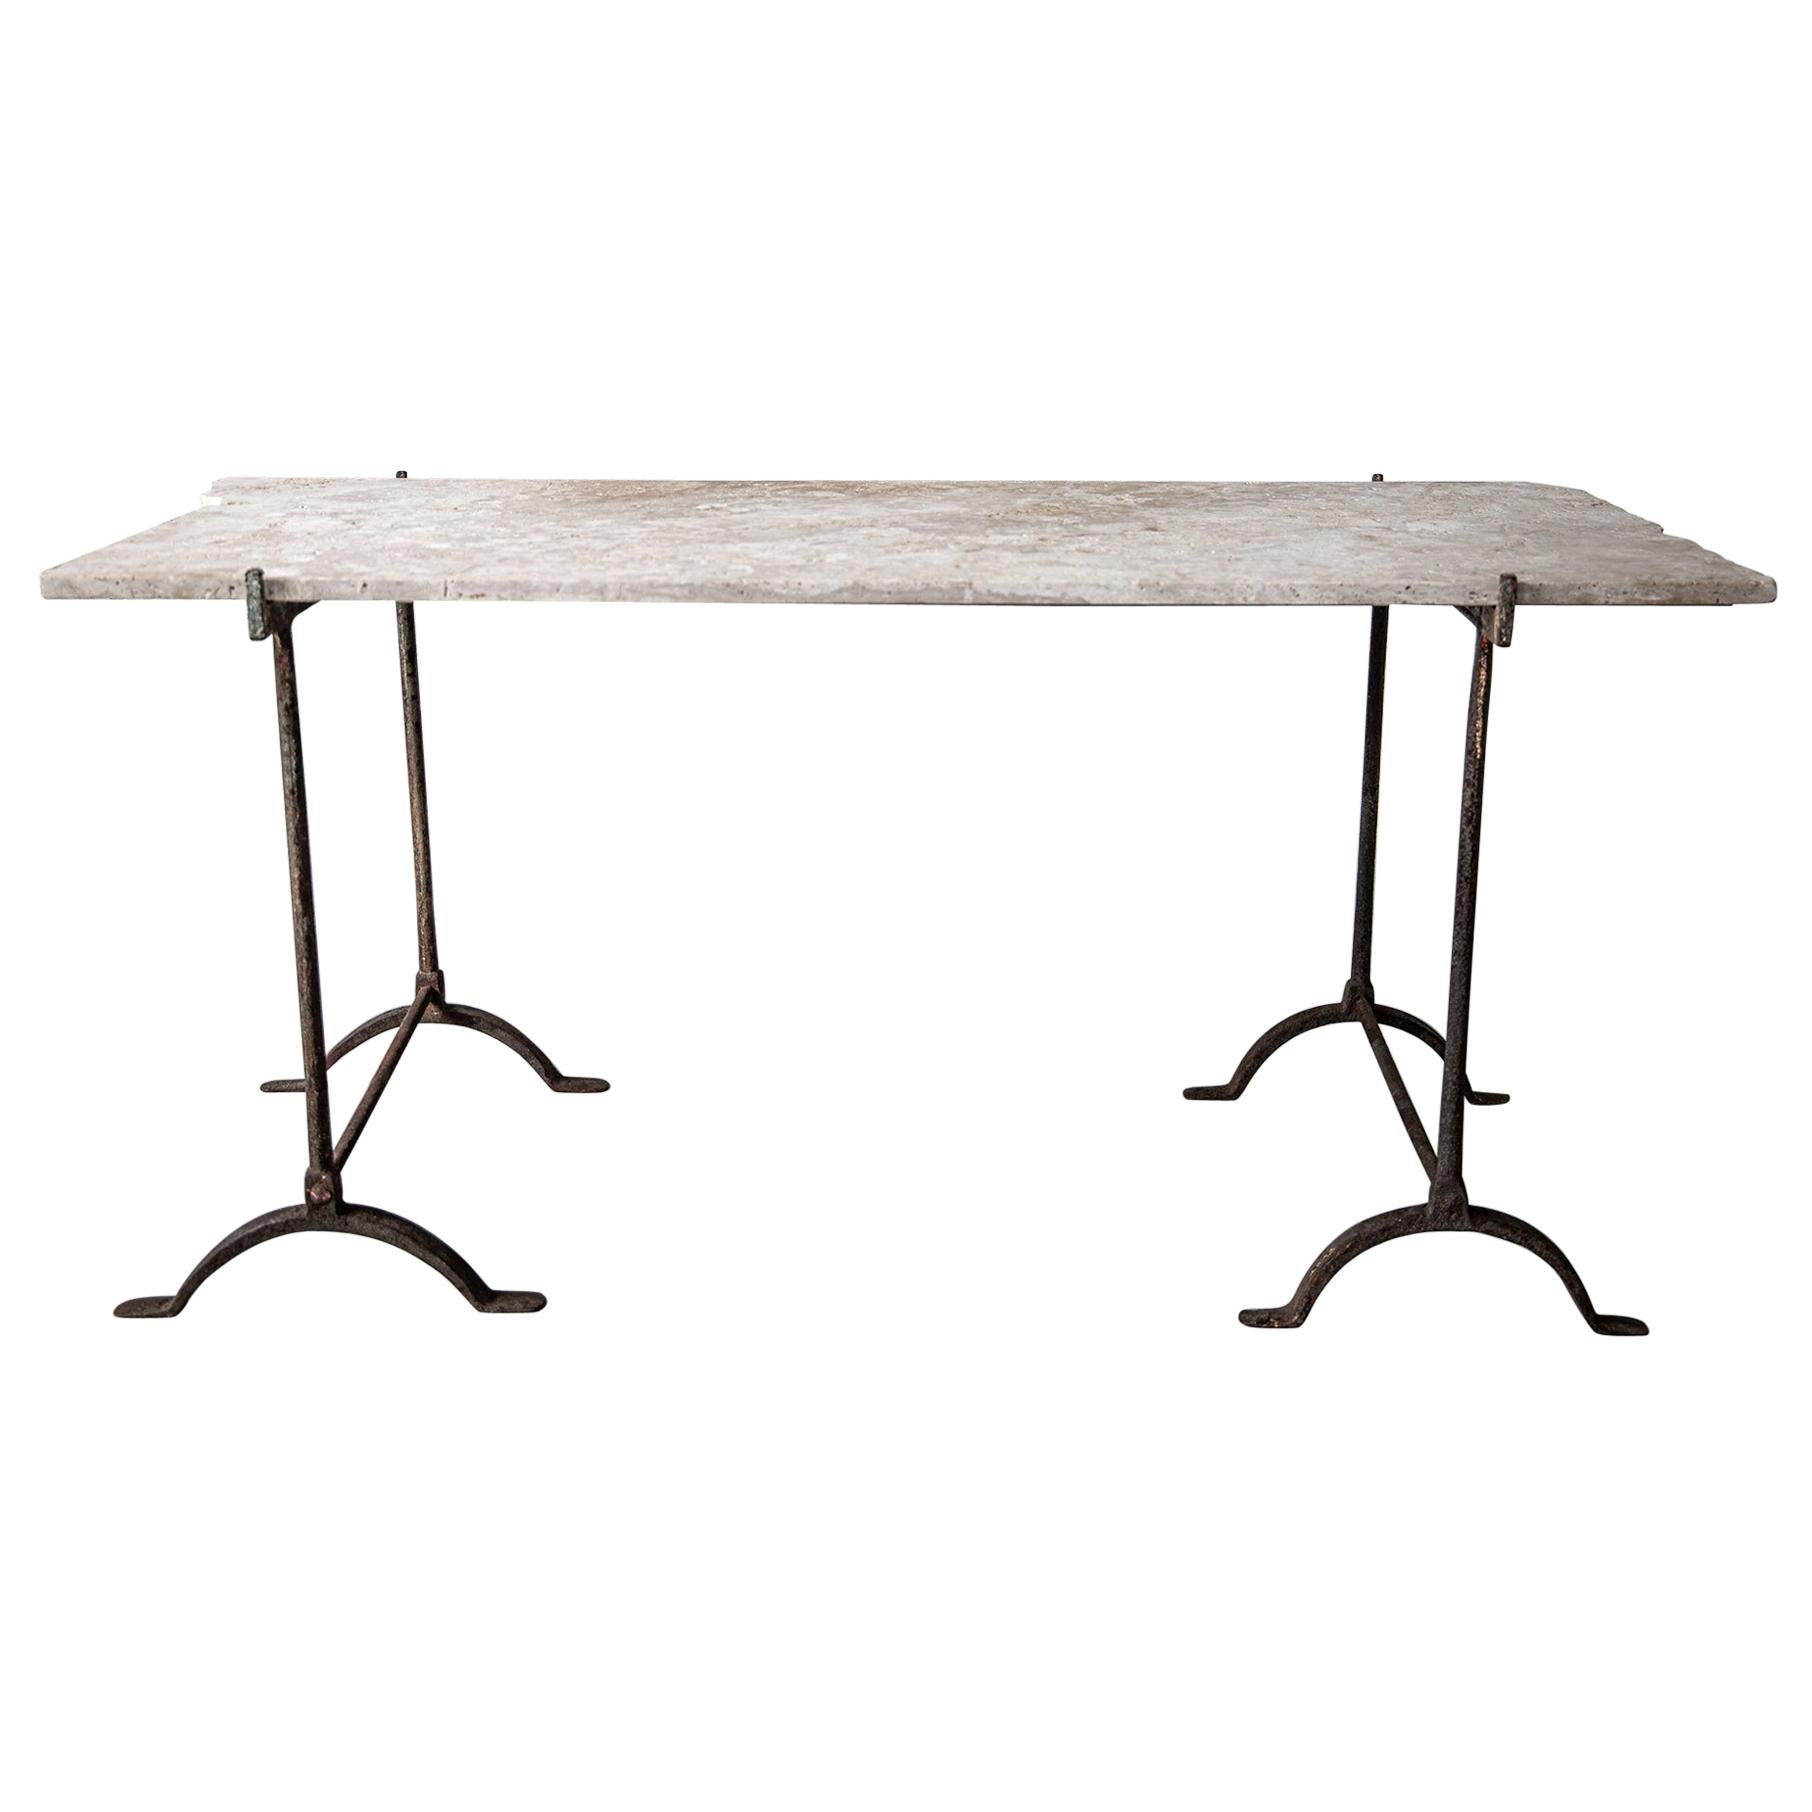 Fragment Trestle Series Desk/Table by Toad, 2022 Contemporary Edition